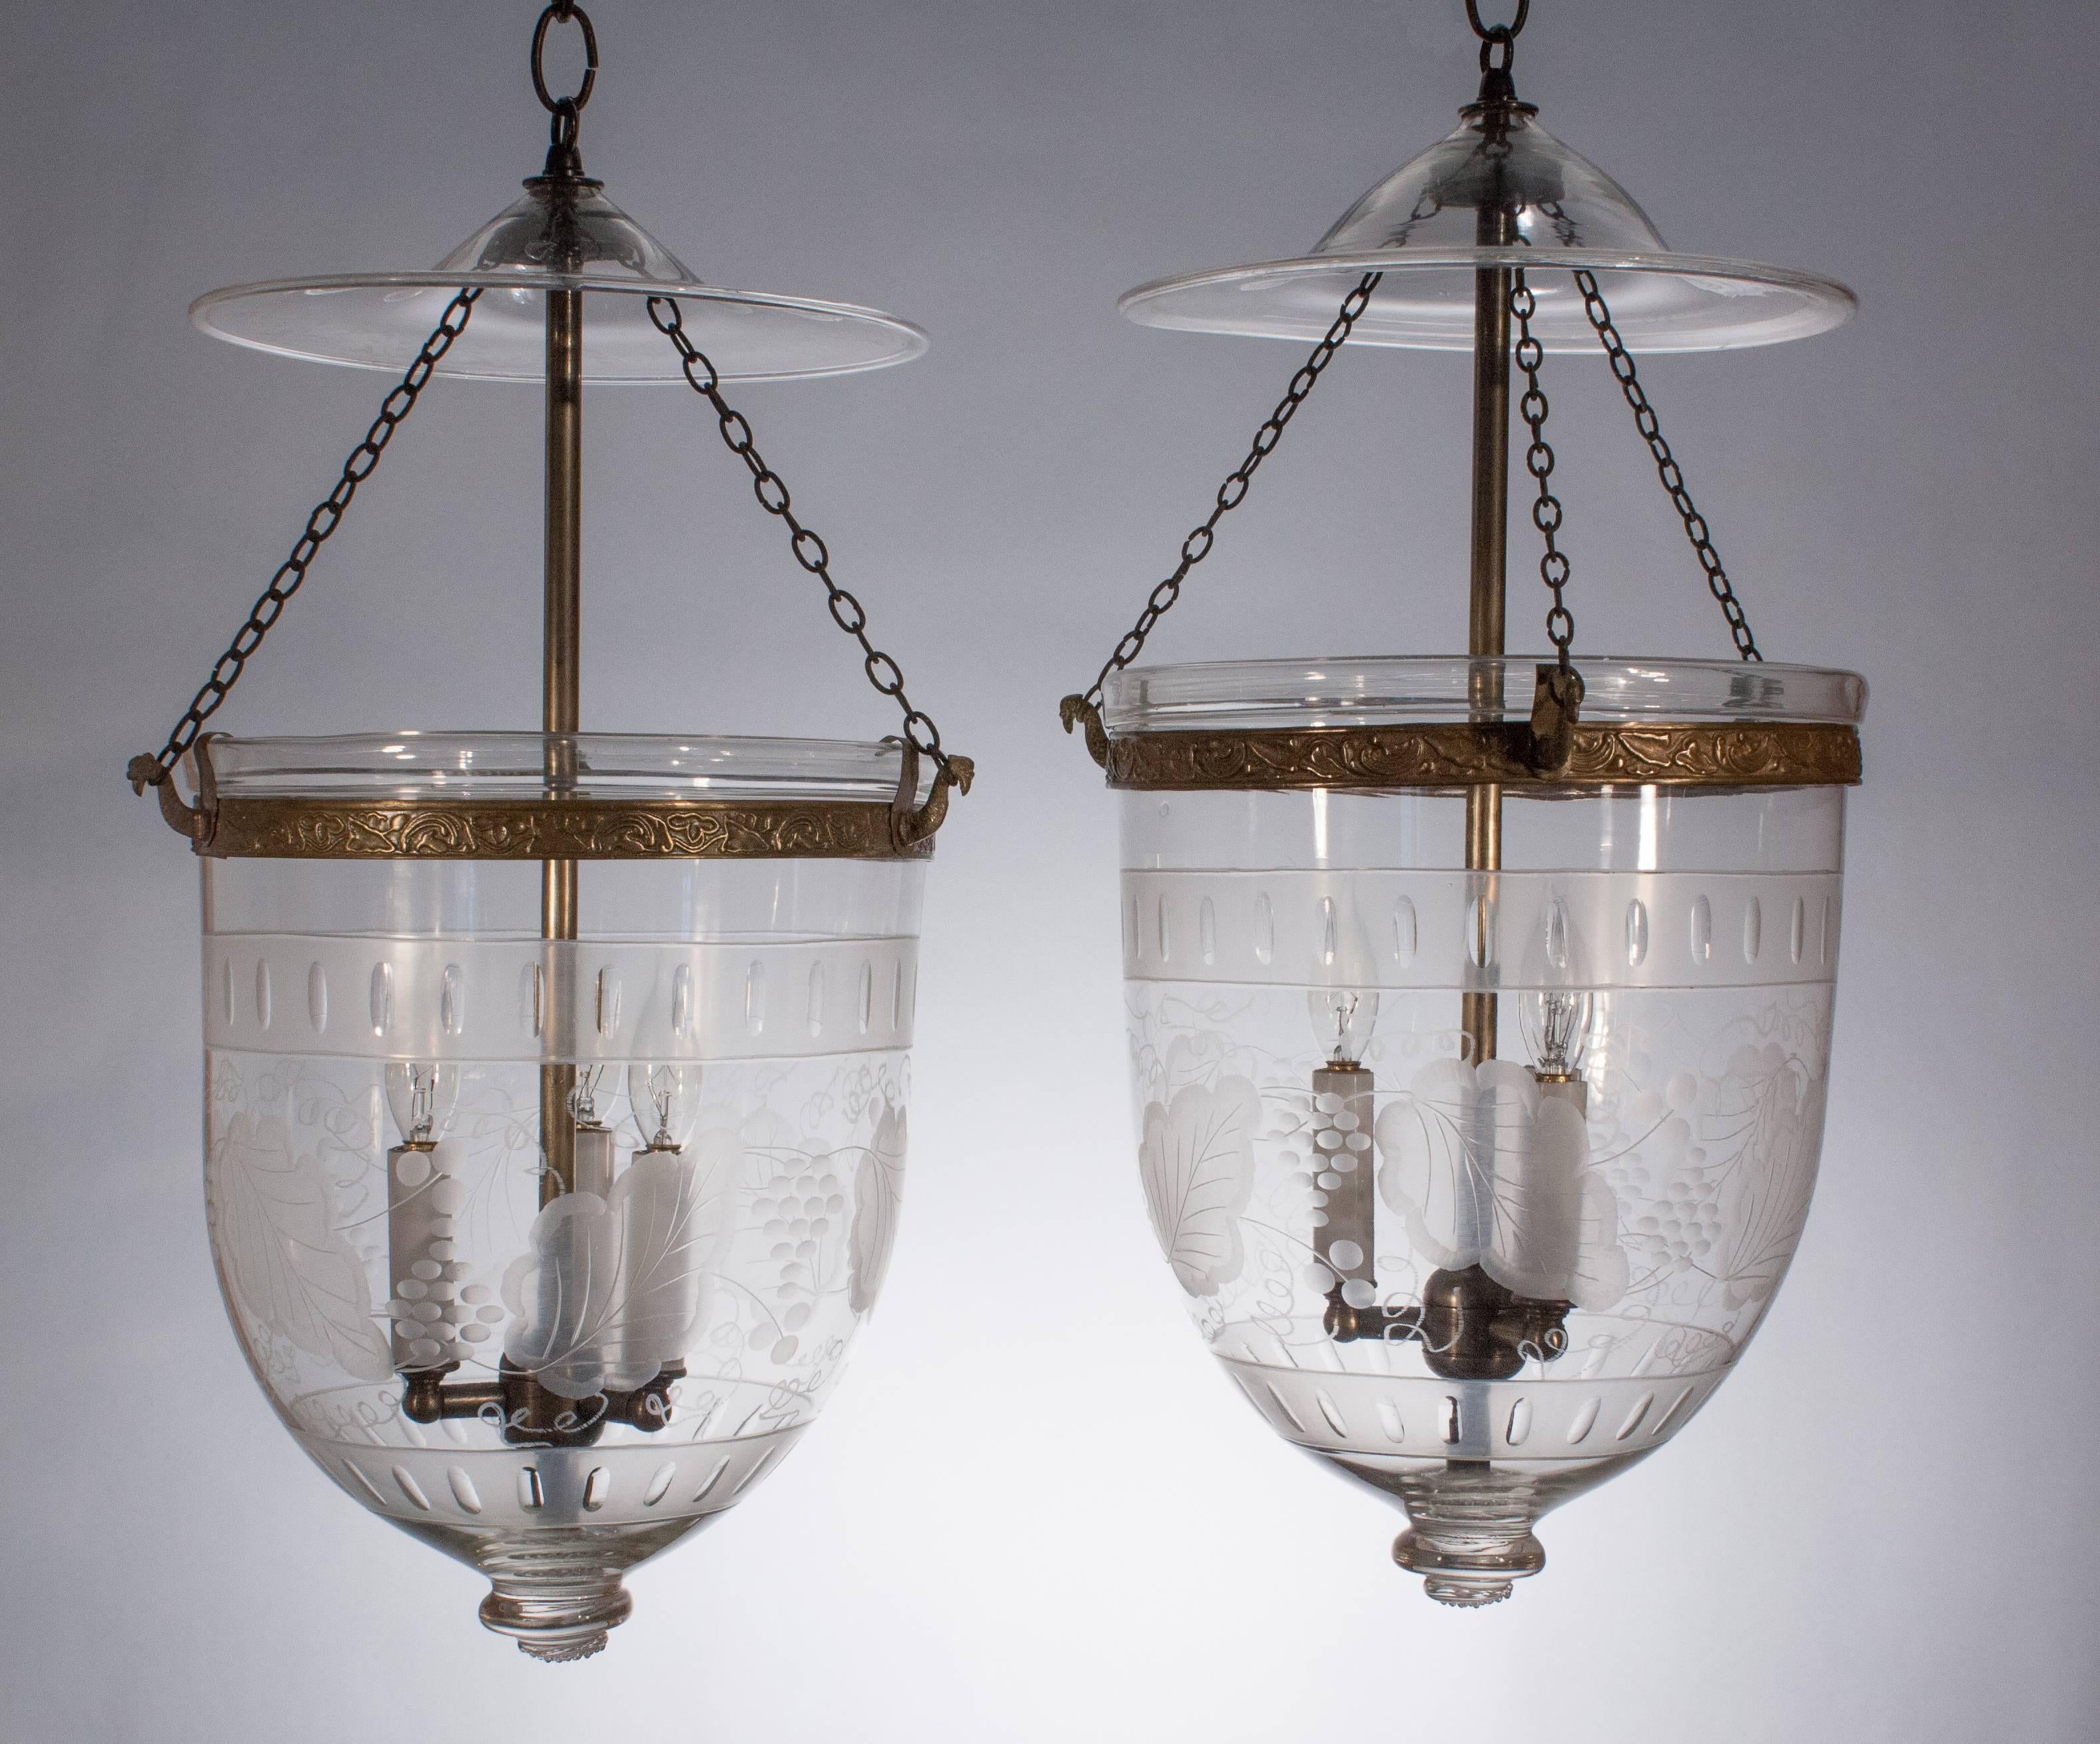 An unusual pair of English handblown glass bell jar lanterns with decorative smoke bells, circa 1870. These medium-sized hall lanterns are distinctively decorated with an etched leaf and berry motif bounded by frosted bands at top and bottom. They